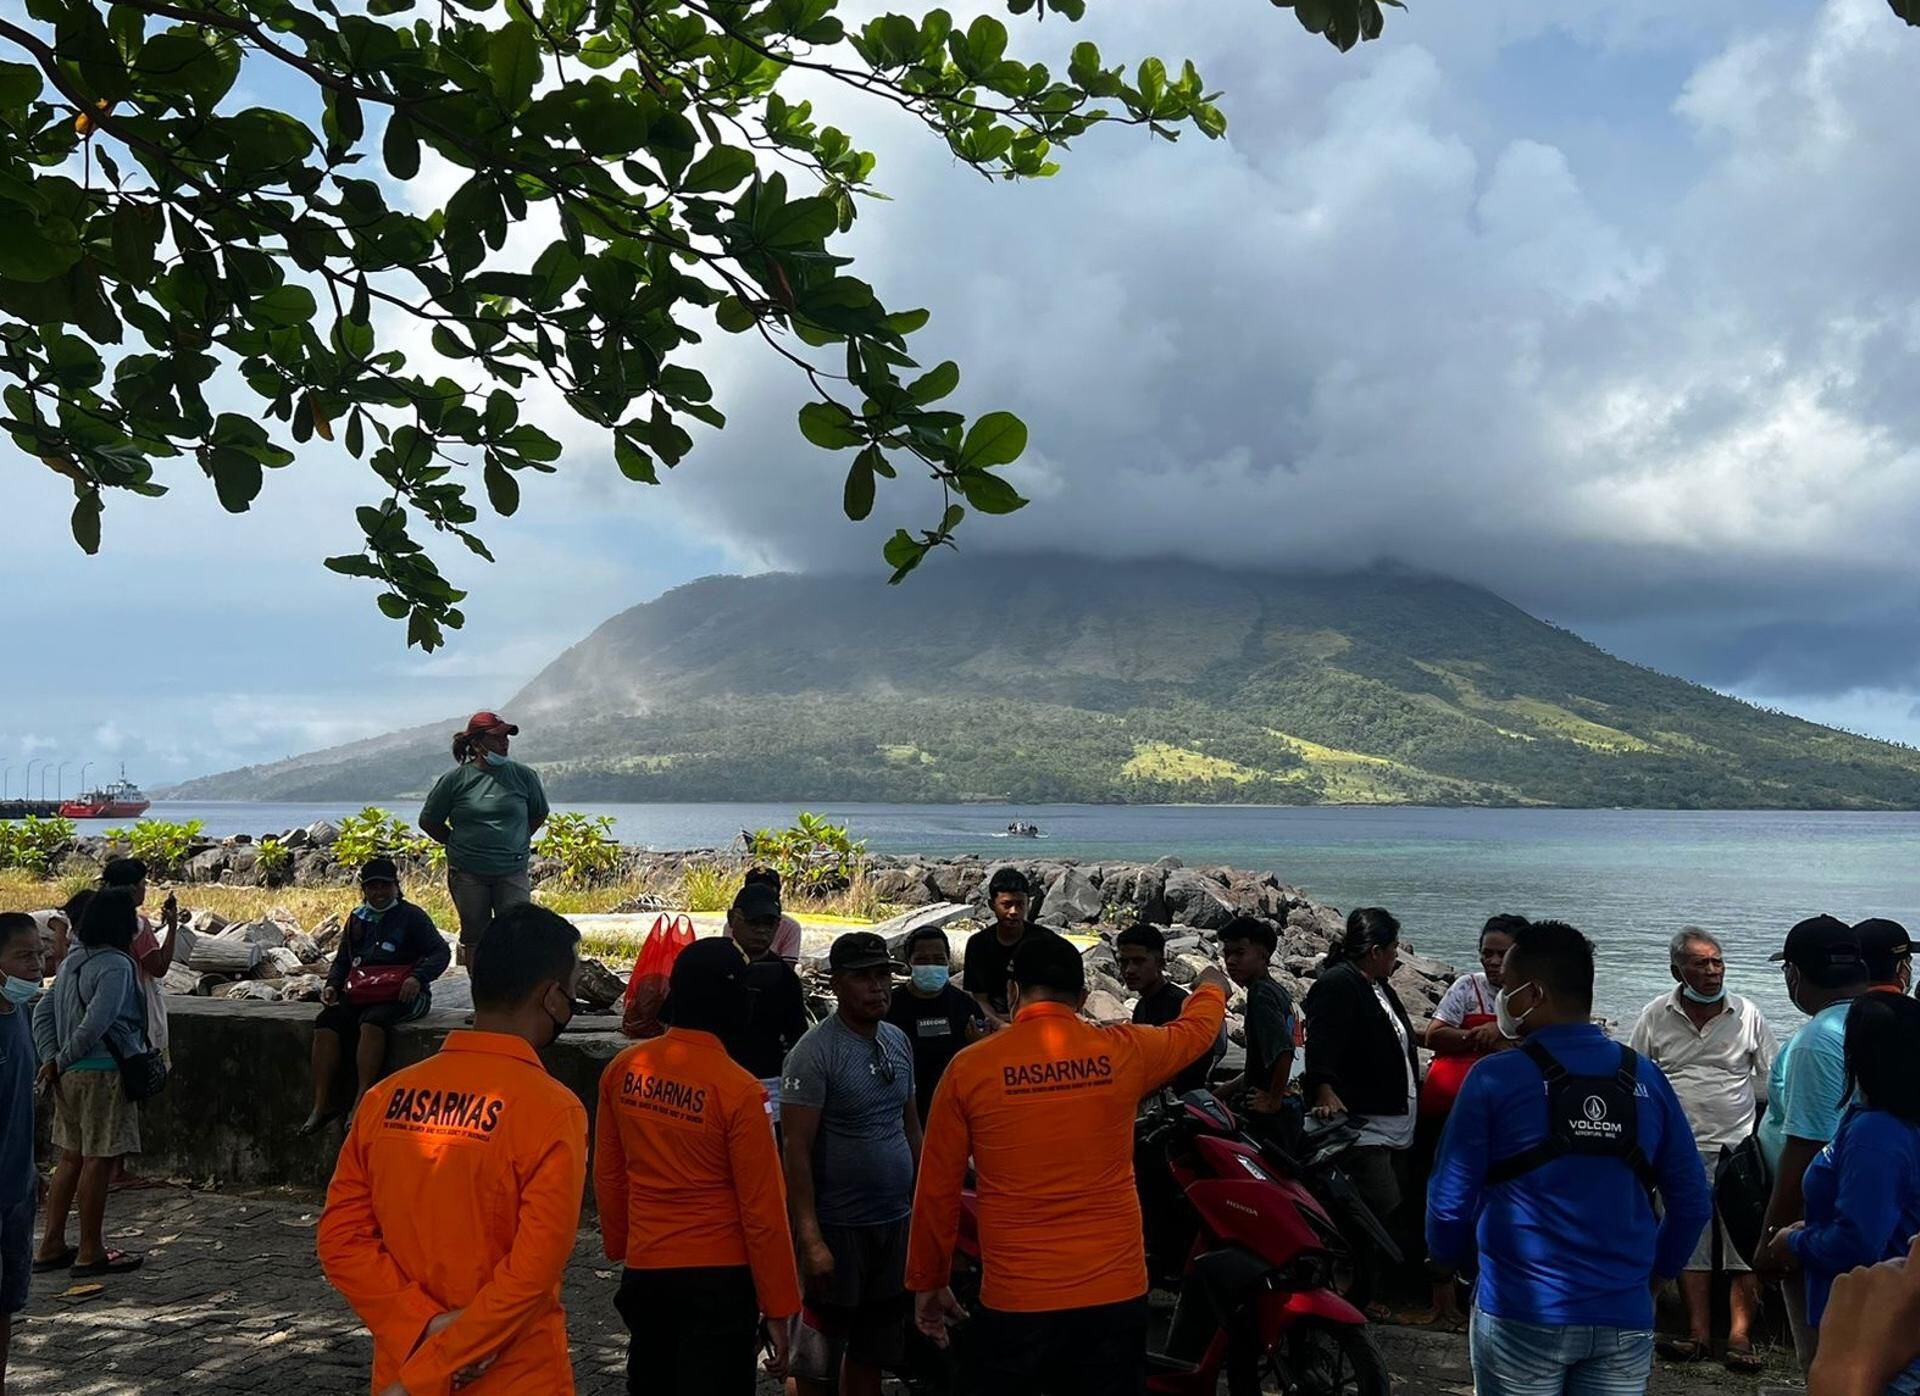 People and members of the National Search and Rescue Agency watch the smoke and ash rising from Mount Ruang.  (EFE/EPA/BASARNAS).